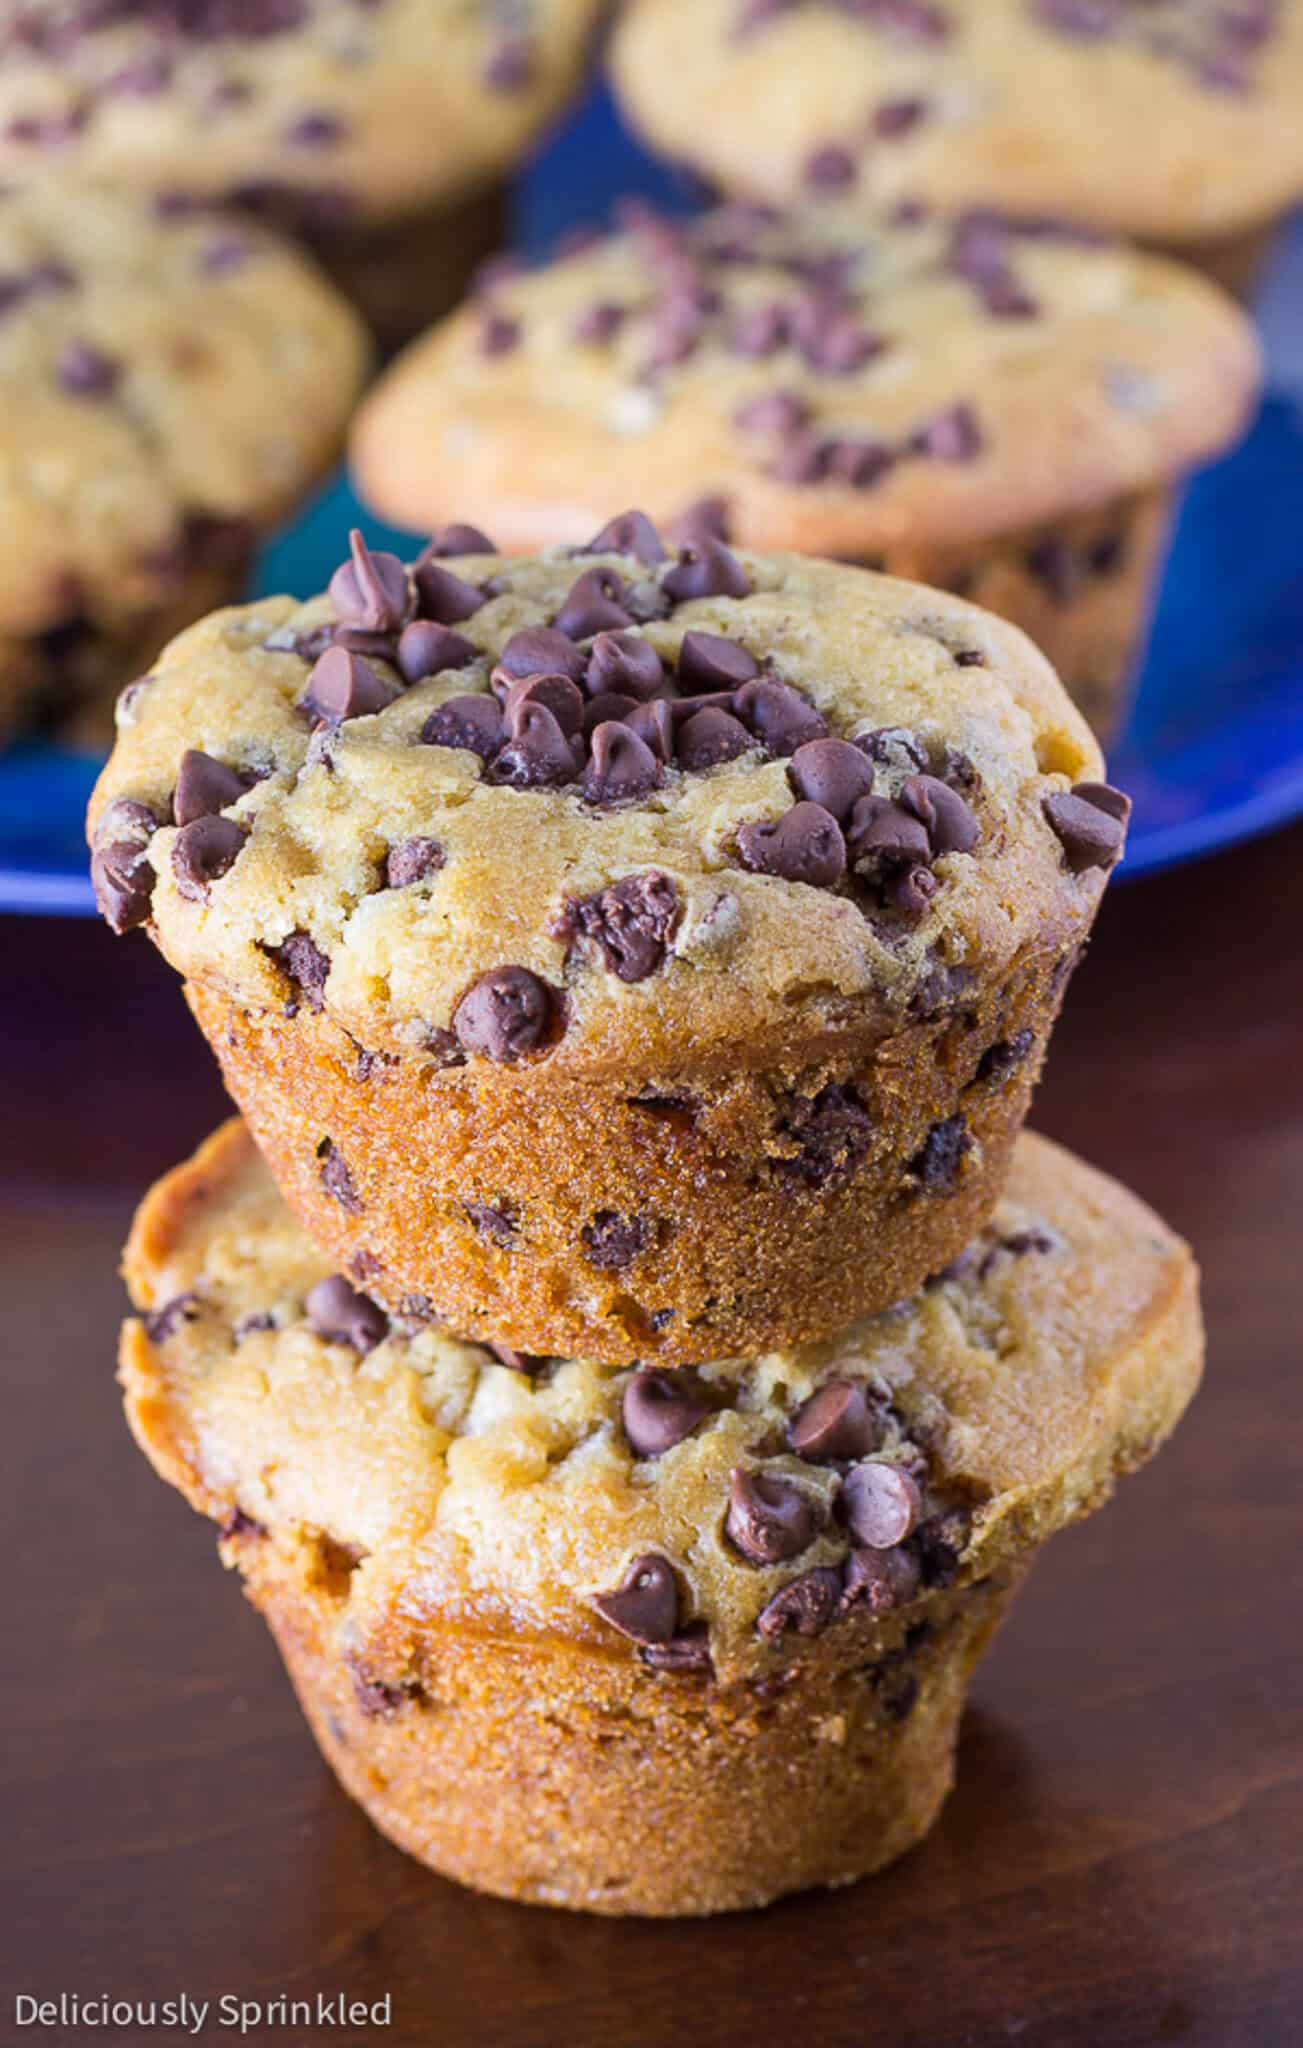 A stack of two chocolate chip muffins on the table with the platter in the background.